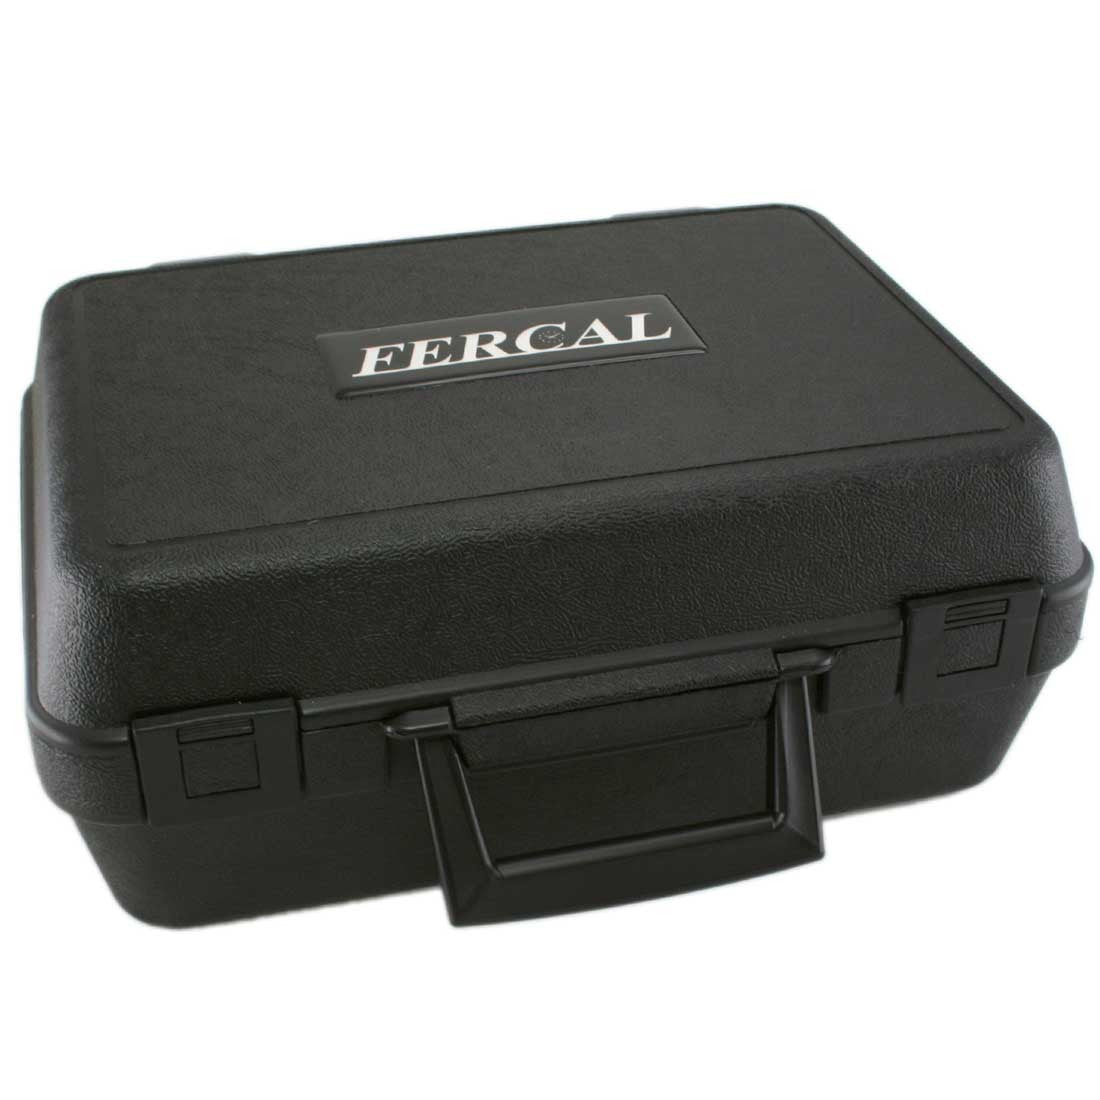 FERCAL Tool Set for Adjusting Rolex Bezels and Inserts (USA MADE)